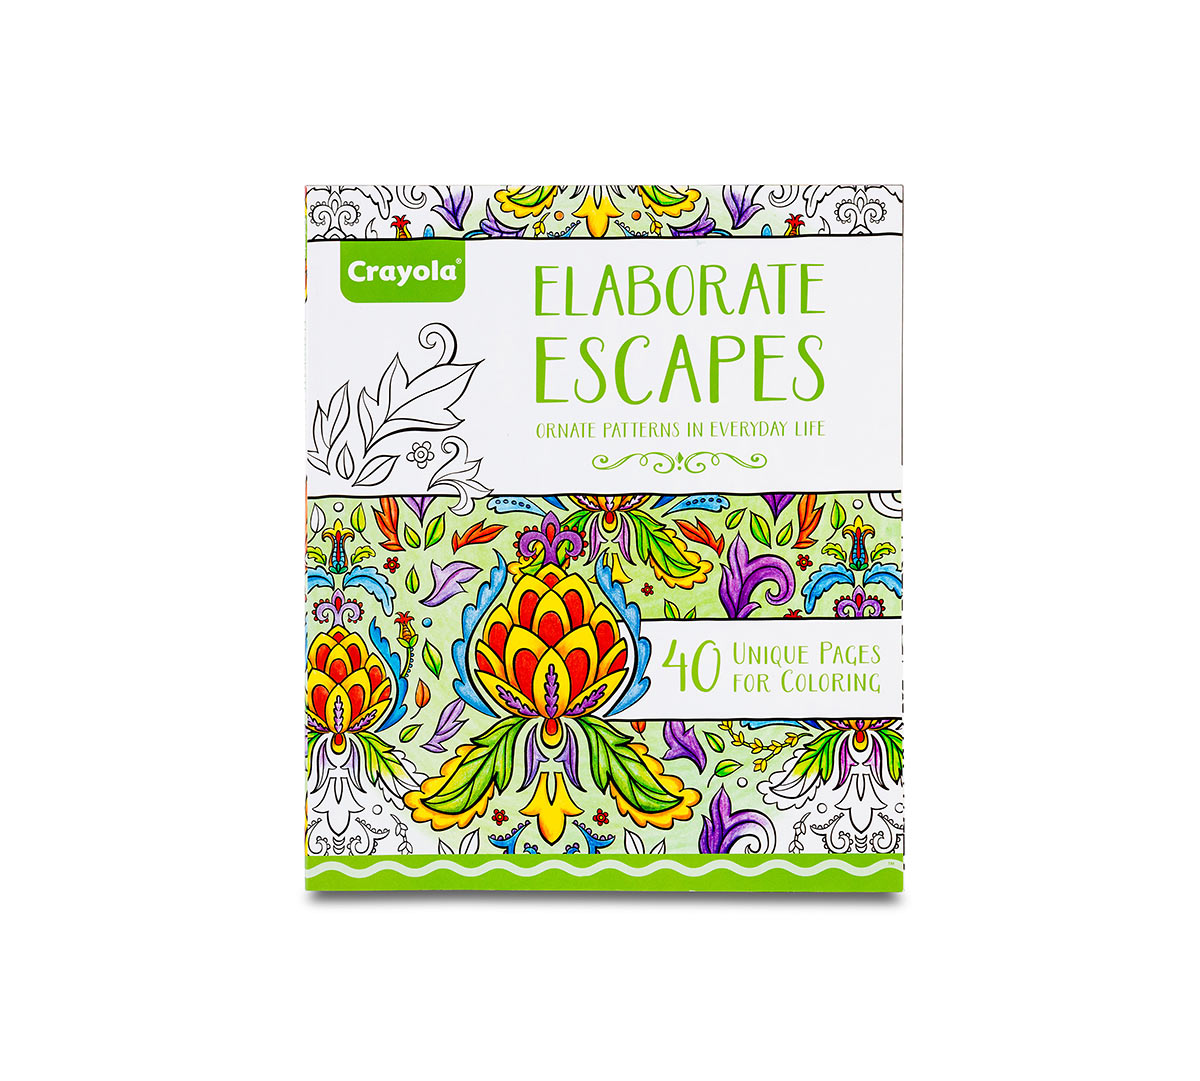 Download Crayola Elaborate Escapes, Adult Coloring Art Activity, 40 Pages, Perforated Pages, Easy Framing ...